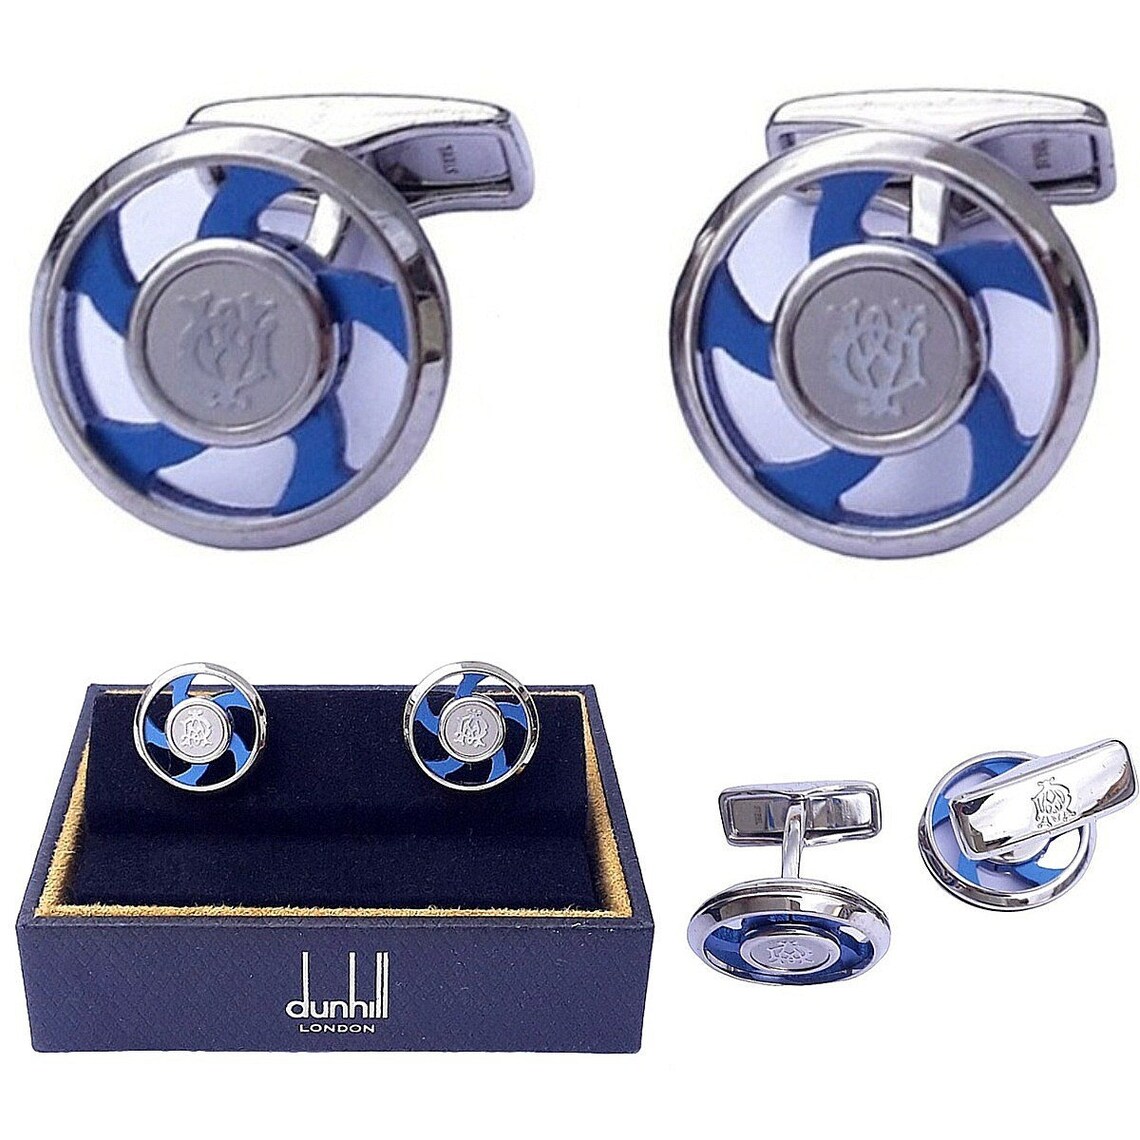 #Dunhill round spinning #Cufflinks - New 2000s -  Silver design with blue carbon fiber decor - Original Box - Cuff Links #giftsforhim #vintage #etsygifts via #etsy t.ly/lMWOr